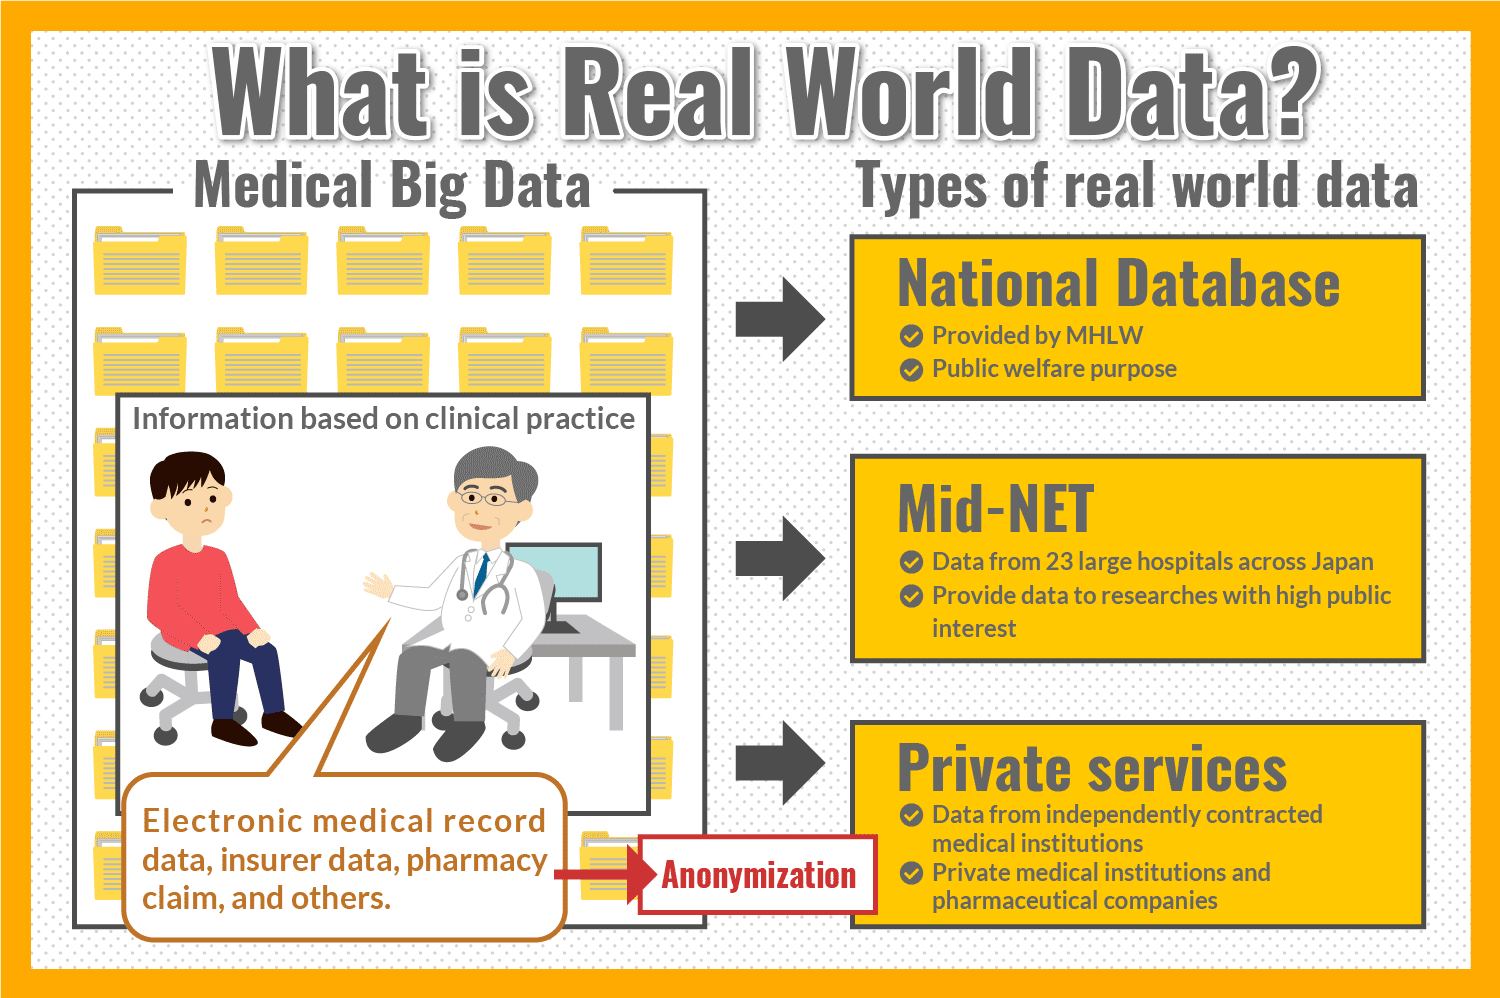 What is Real World Data?